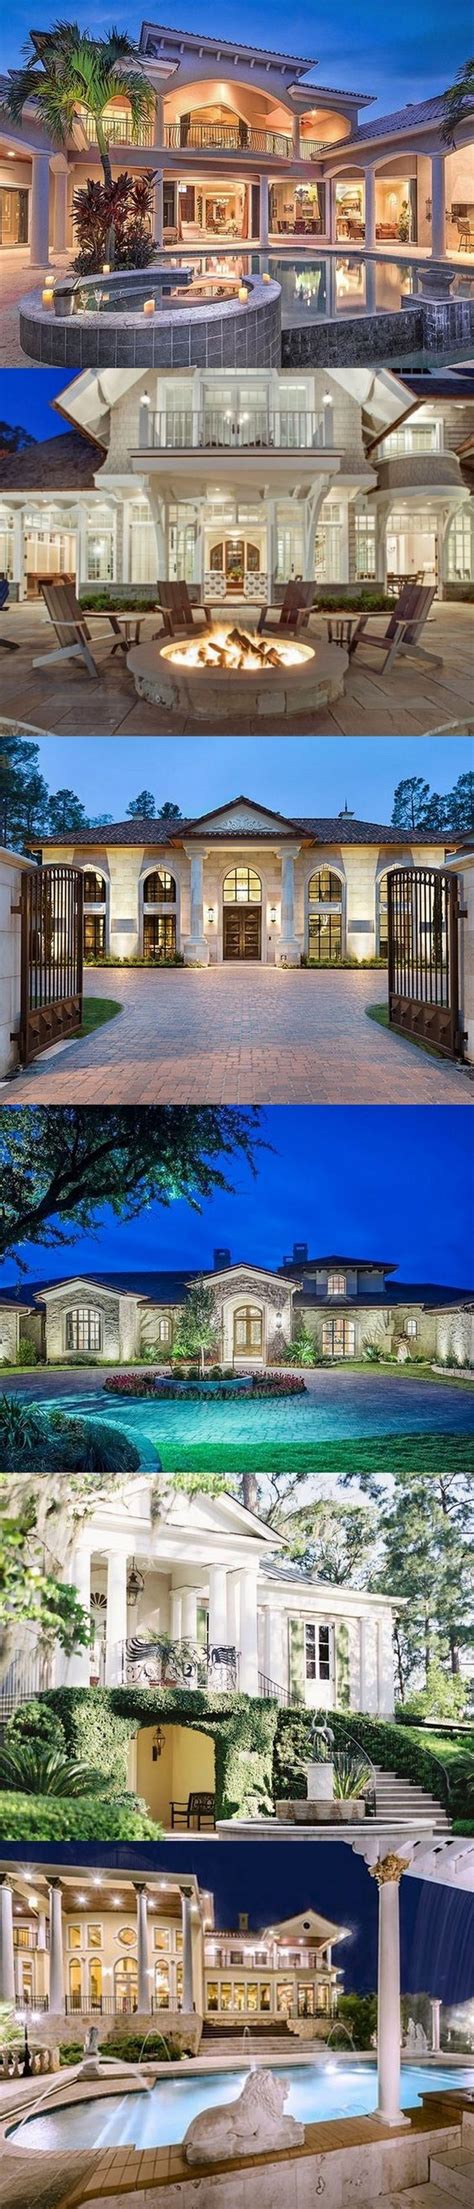 54 Stunning Dream Homes And Mega Mansions From Social Media Find